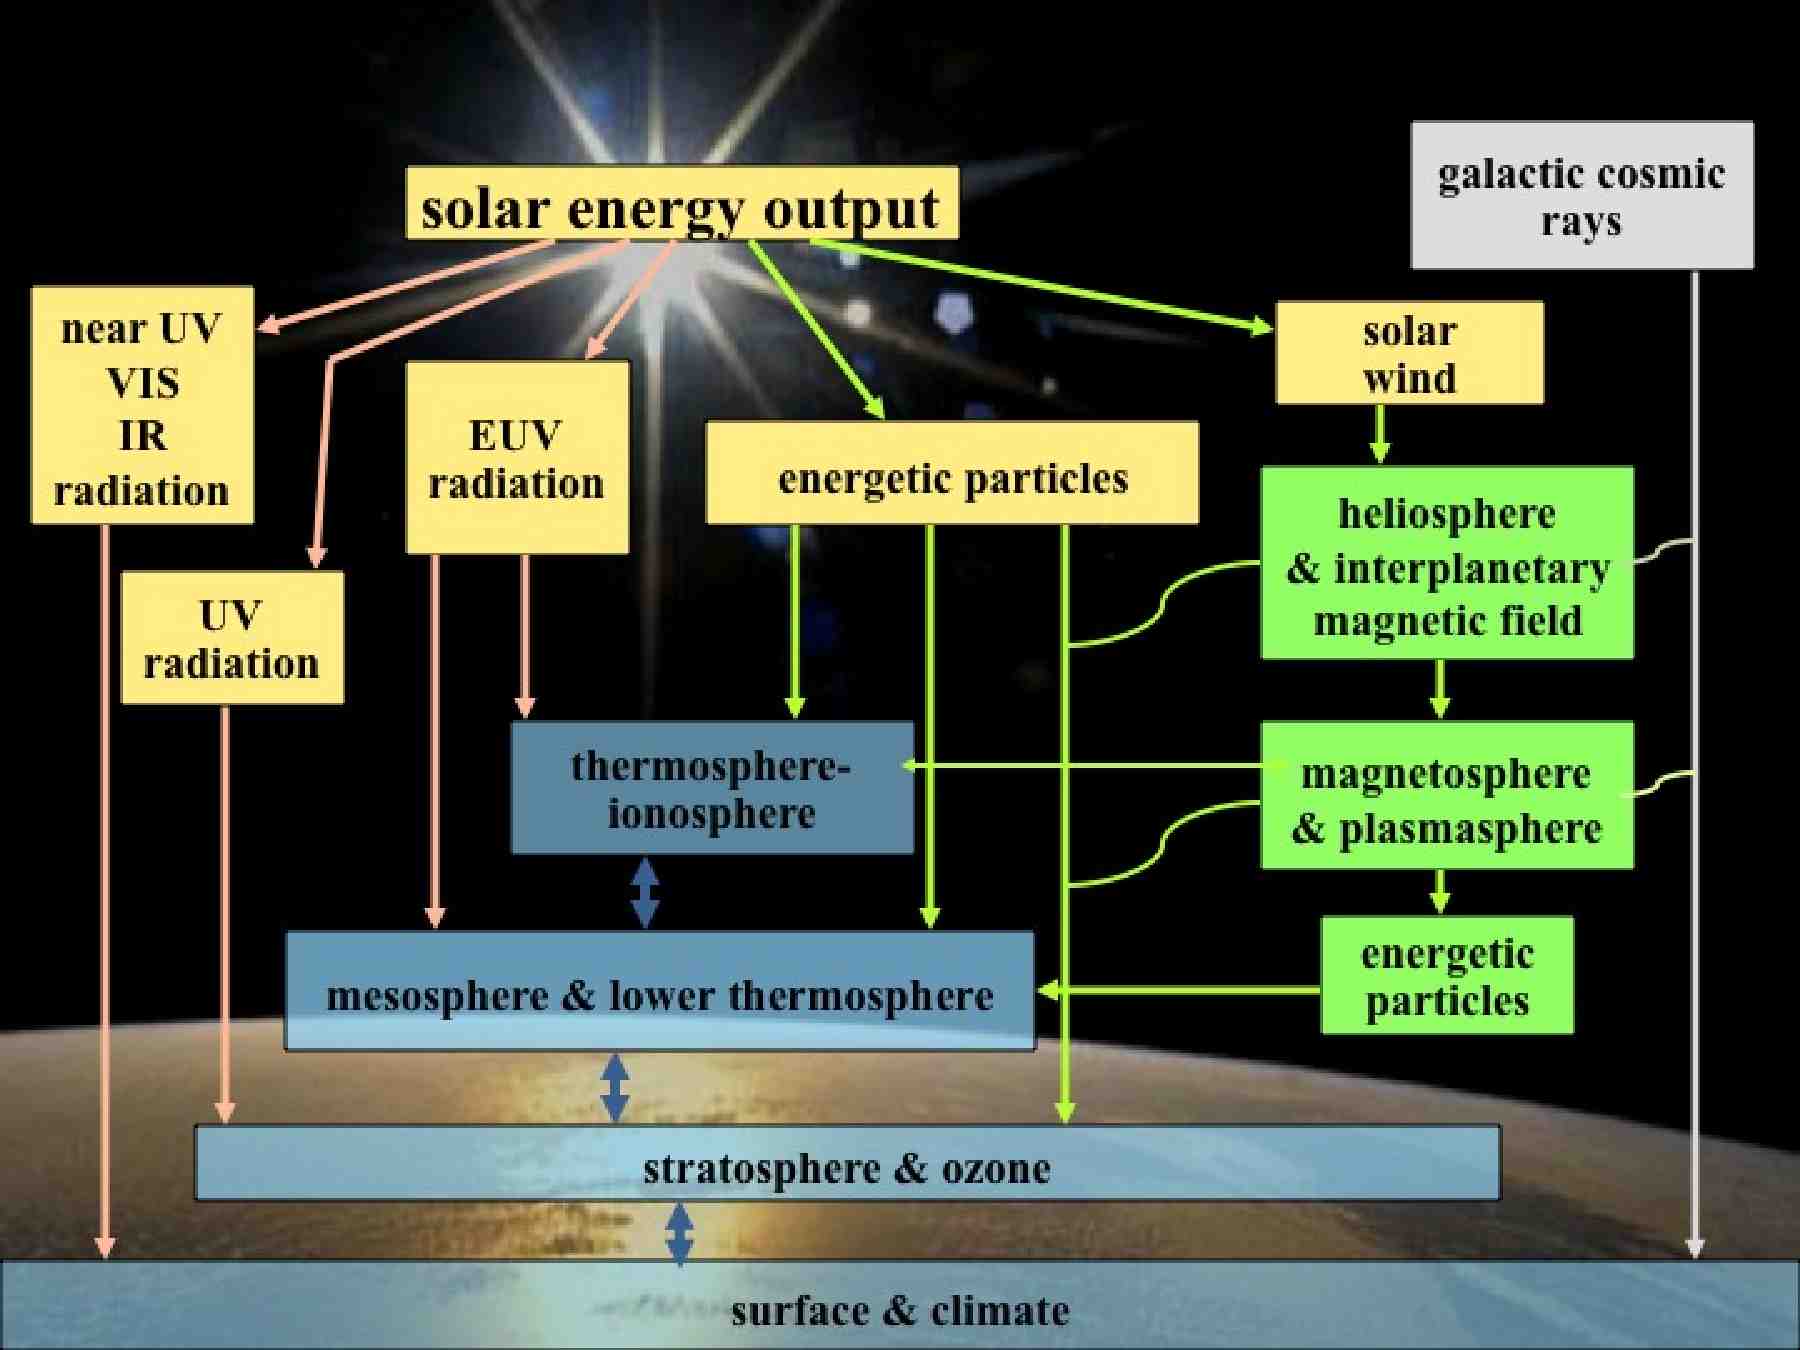 Image of coupled sun-earth system schematic